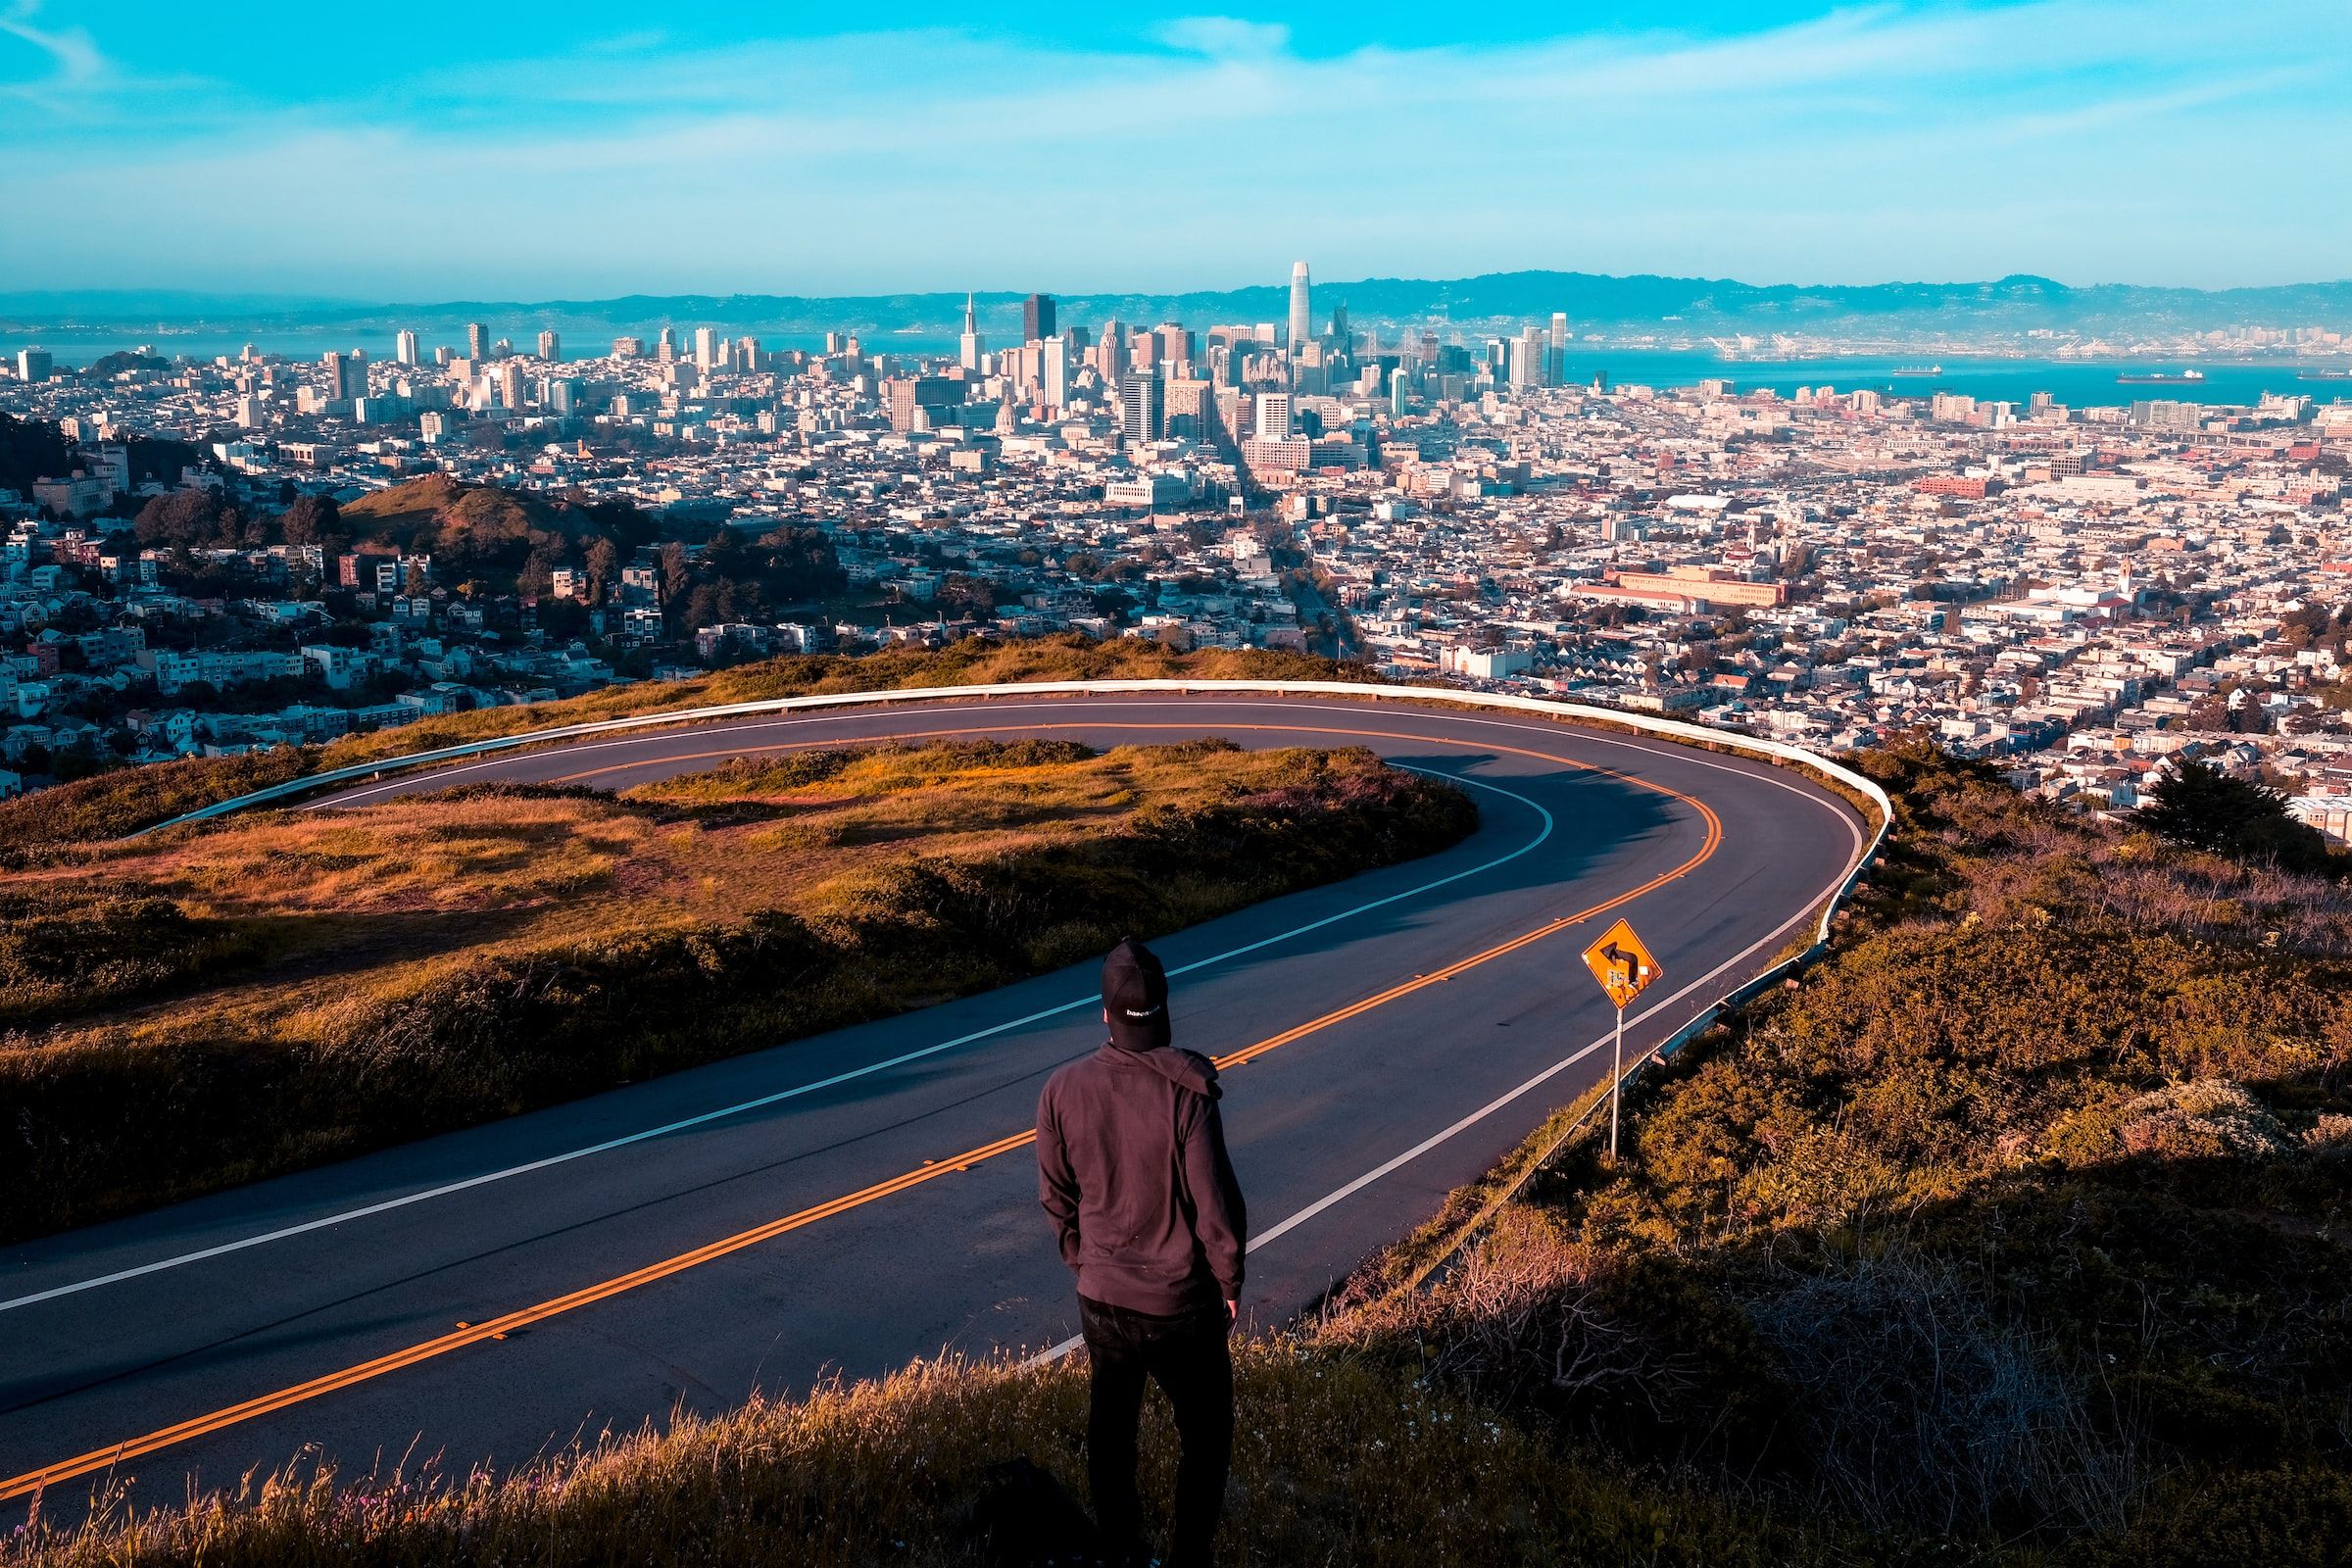 A person overlooking the city of San Francisco